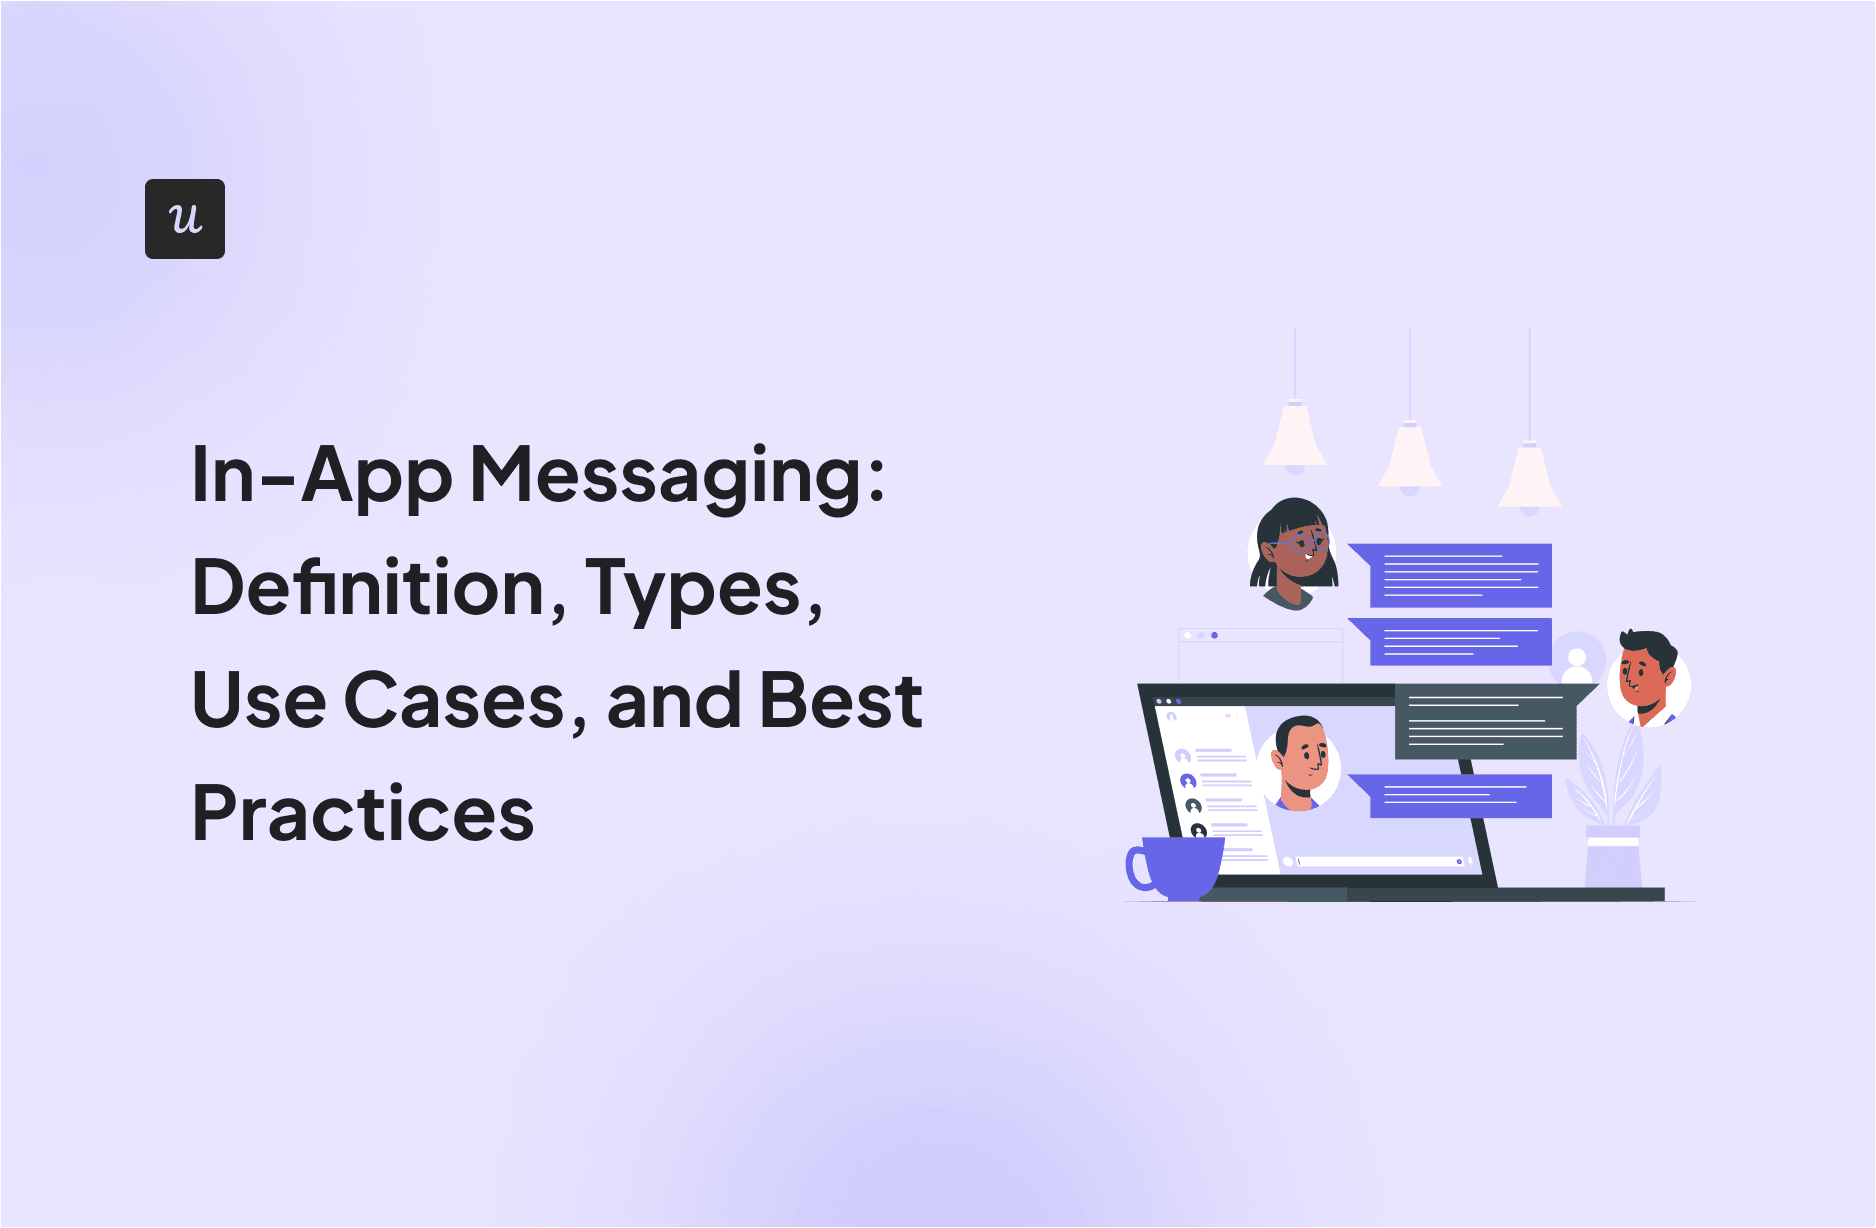 In-App Messaging: Definition, Types, Use Cases, and Best Practices cover